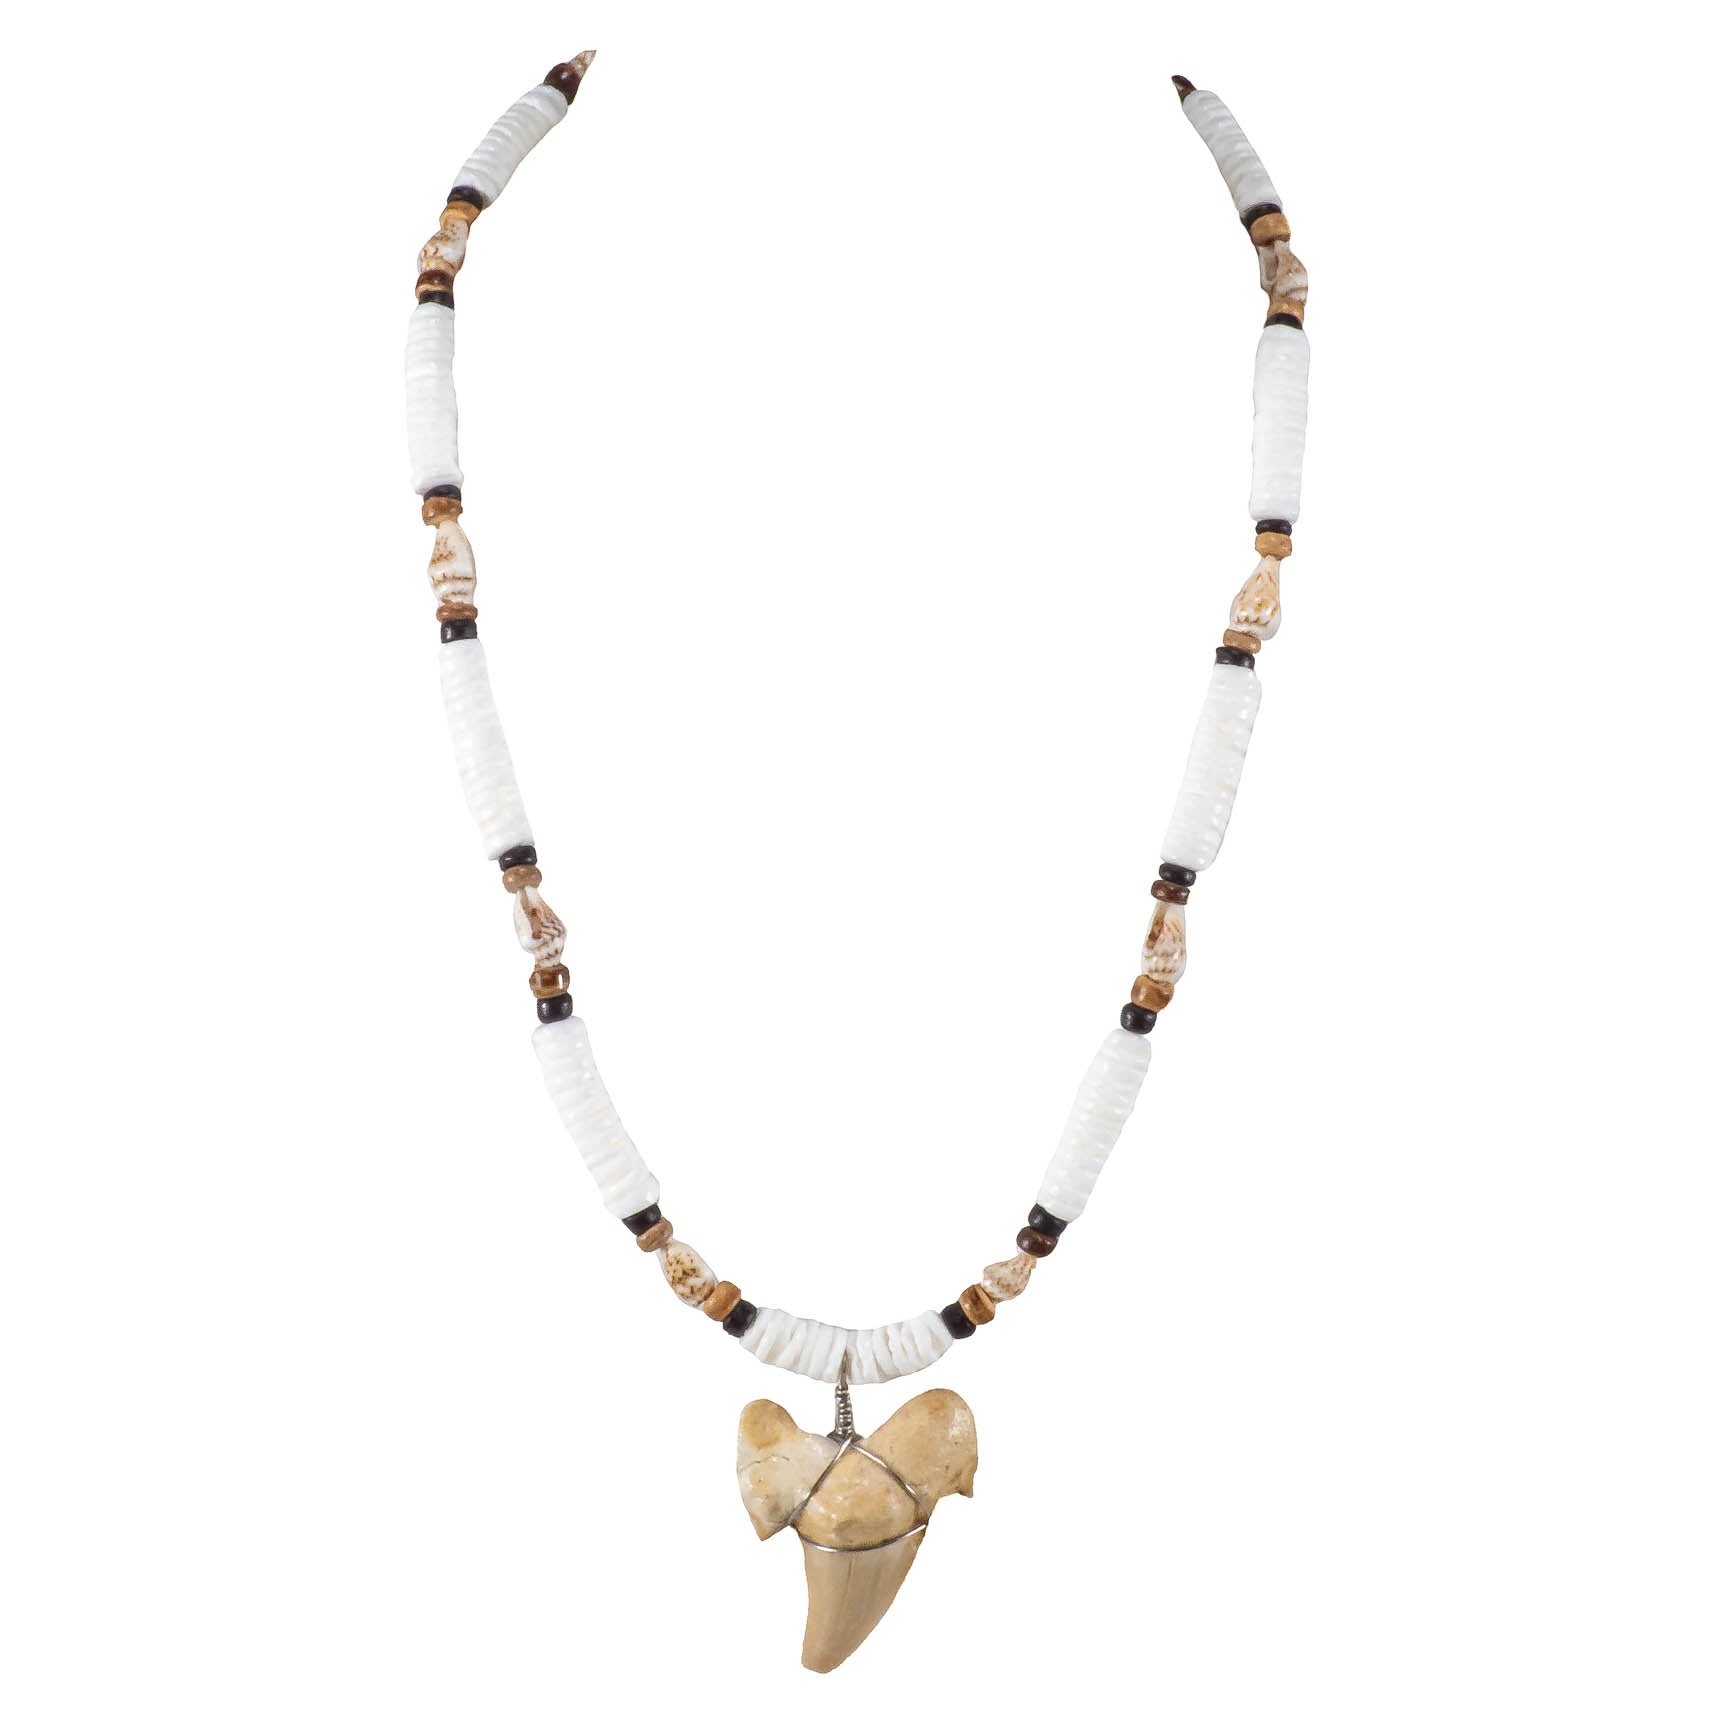 1¼"+ Shark Tooth Pendant on Puka Shell  and Coconut Beads Necklace